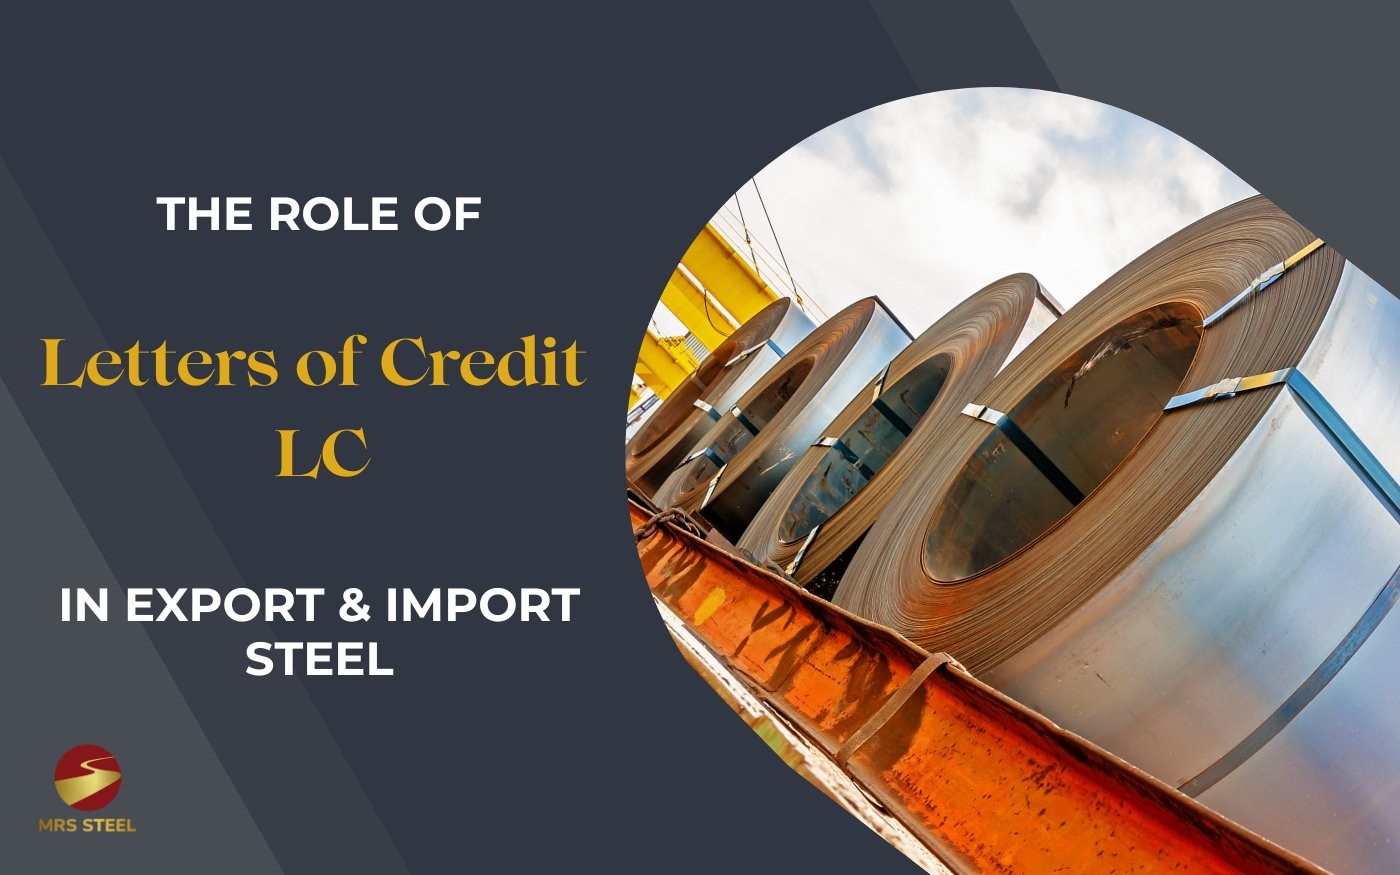 The role of Letters of Credit LC in export and import